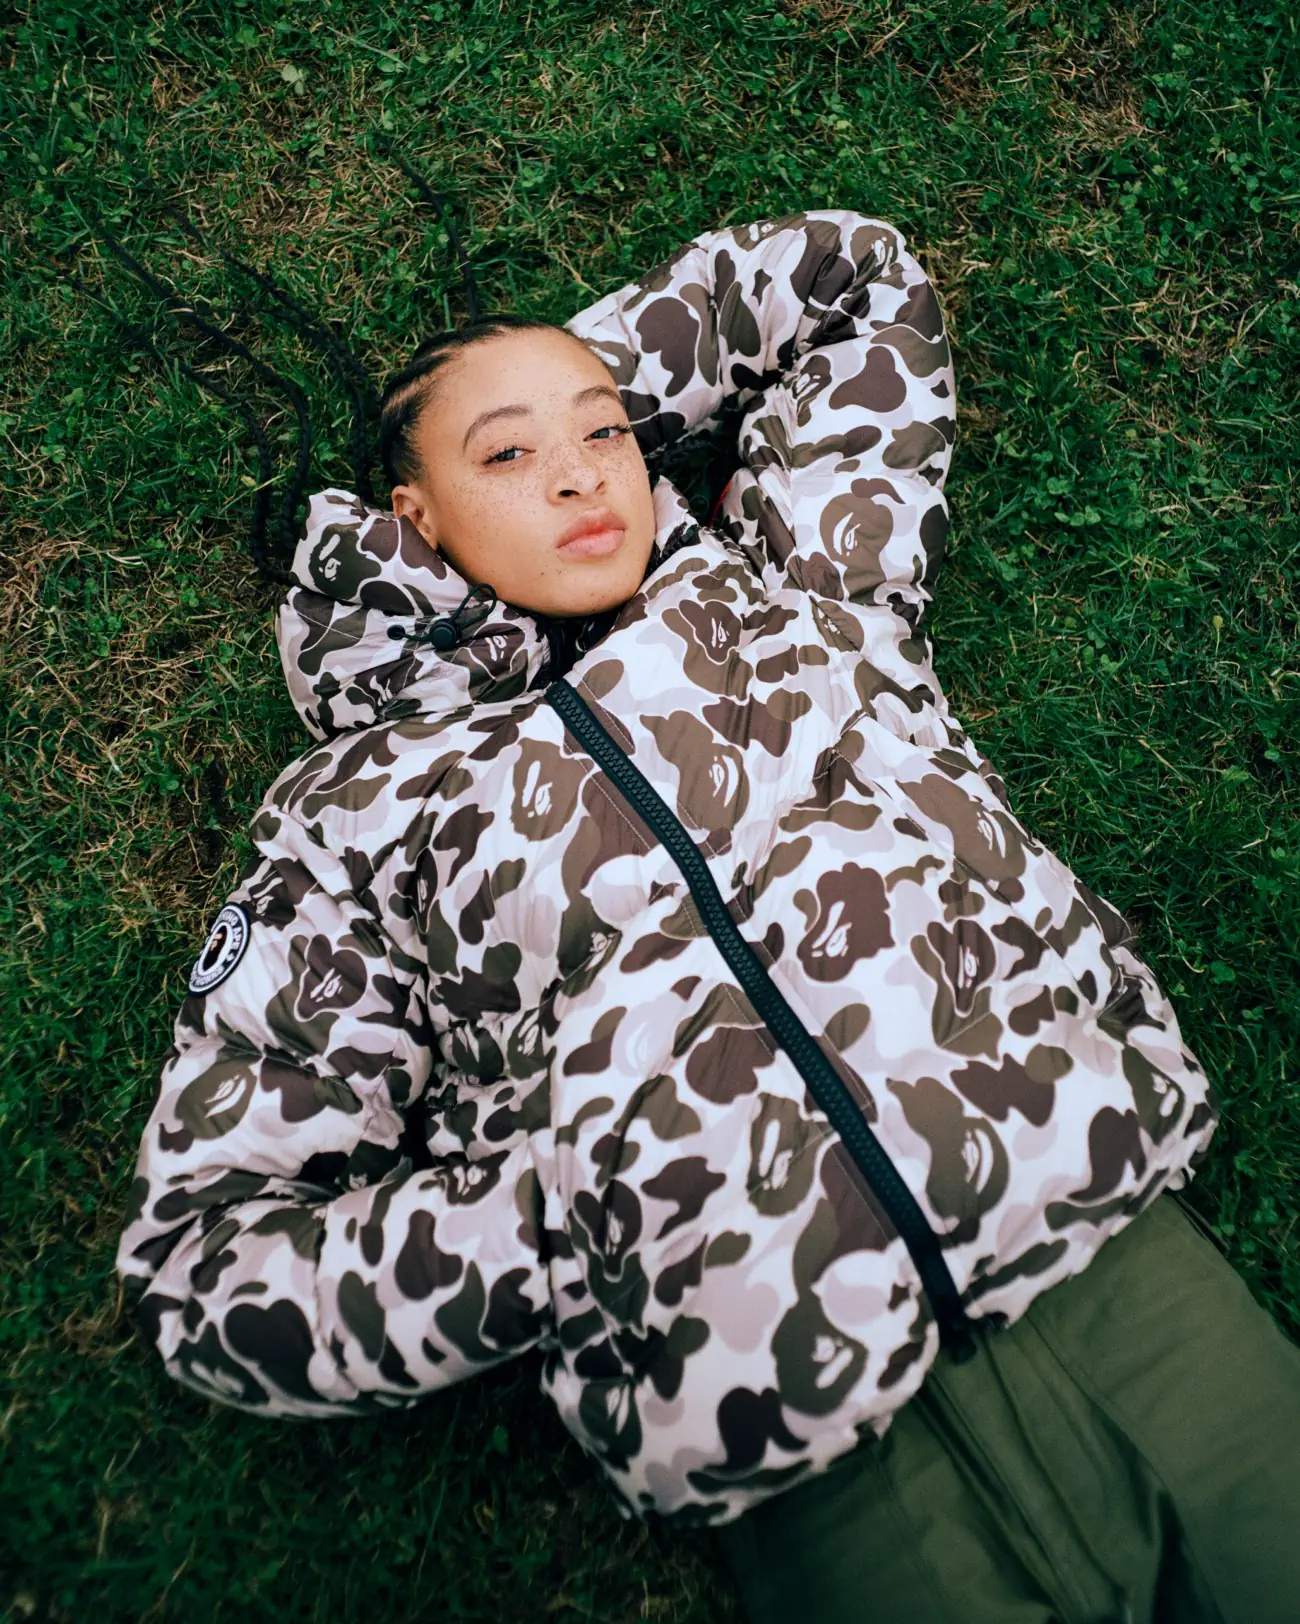 Canada Goose x BAPE® launch new limited-edition streetwear-inspired capsule collection